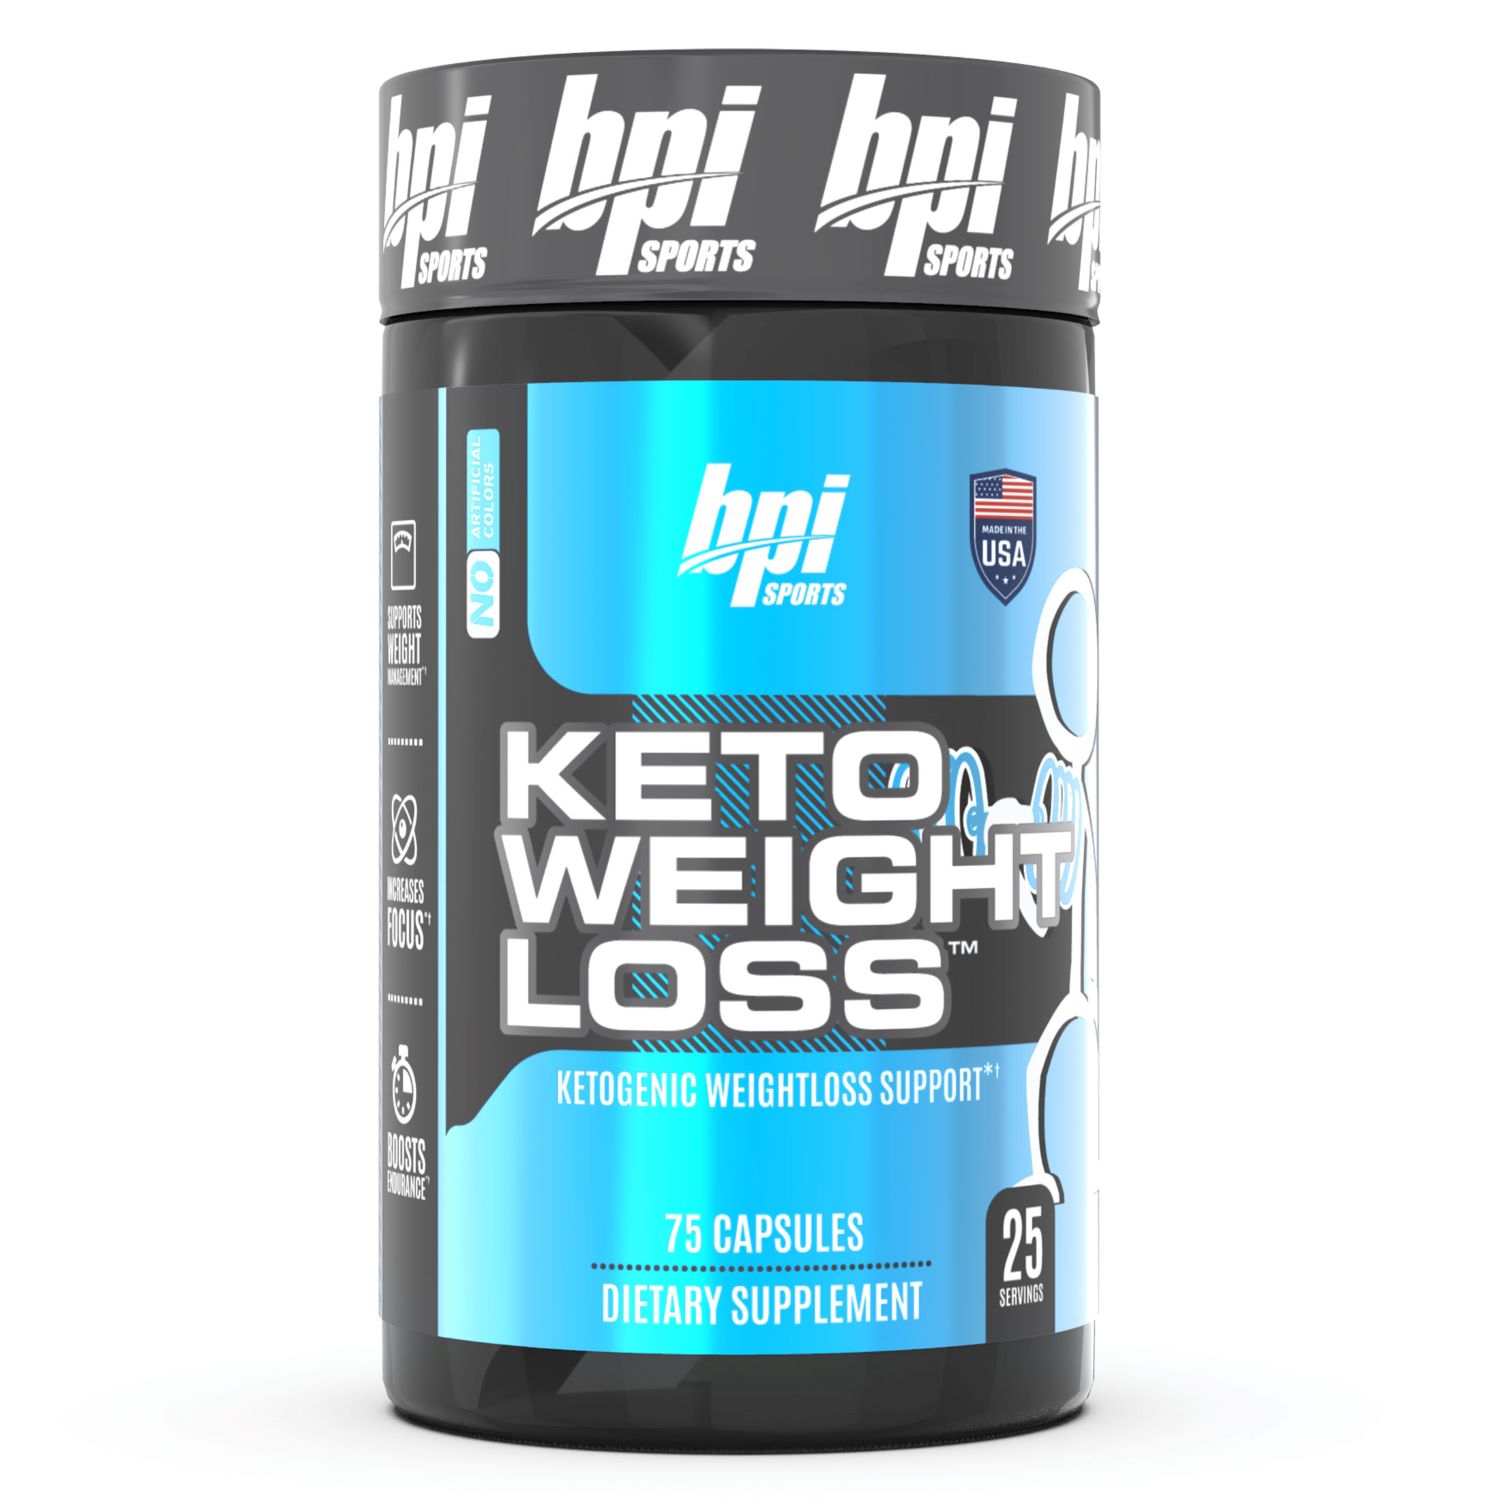 BPI Sports Keto Weight Loss Dietary Supplement, 75 Capsules - image 1 of 7